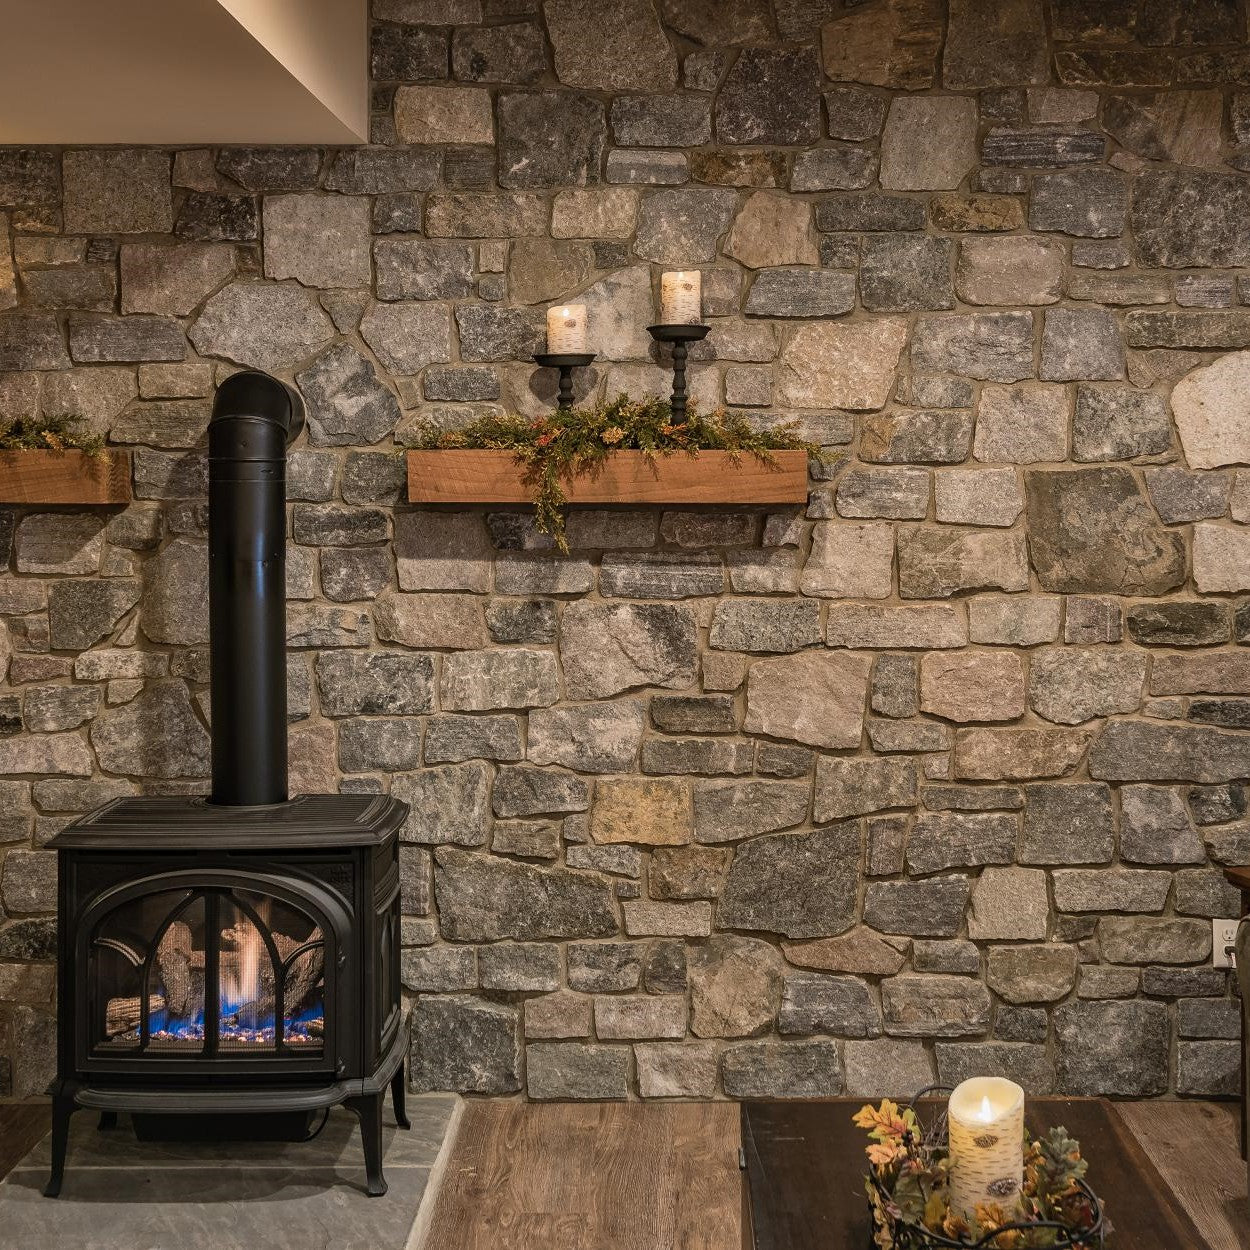 A stunning display of Real Stone Wall Veneers showcasing a variety of patterns and stones, ideal for enhancing both exterior and interior spaces with natural elegance.